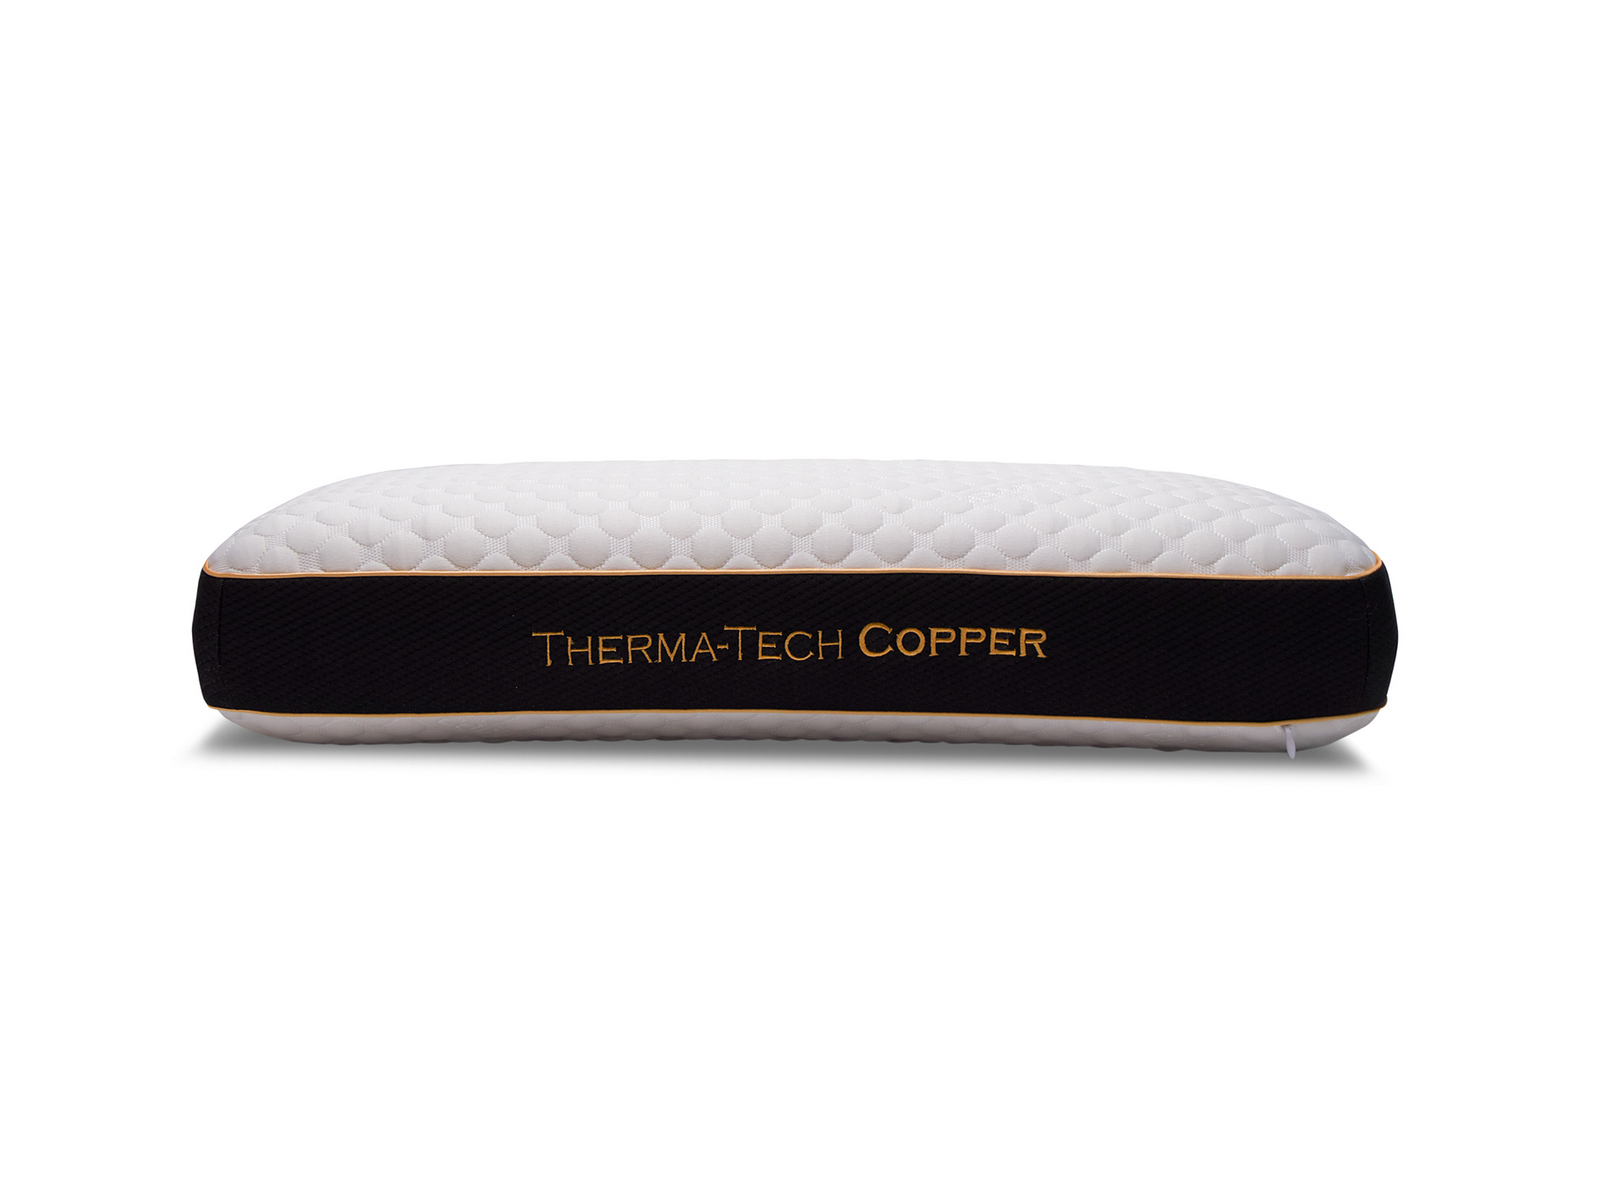 Healthy Sleep King Therma-Tech Copper Pillow | 5 High Profile